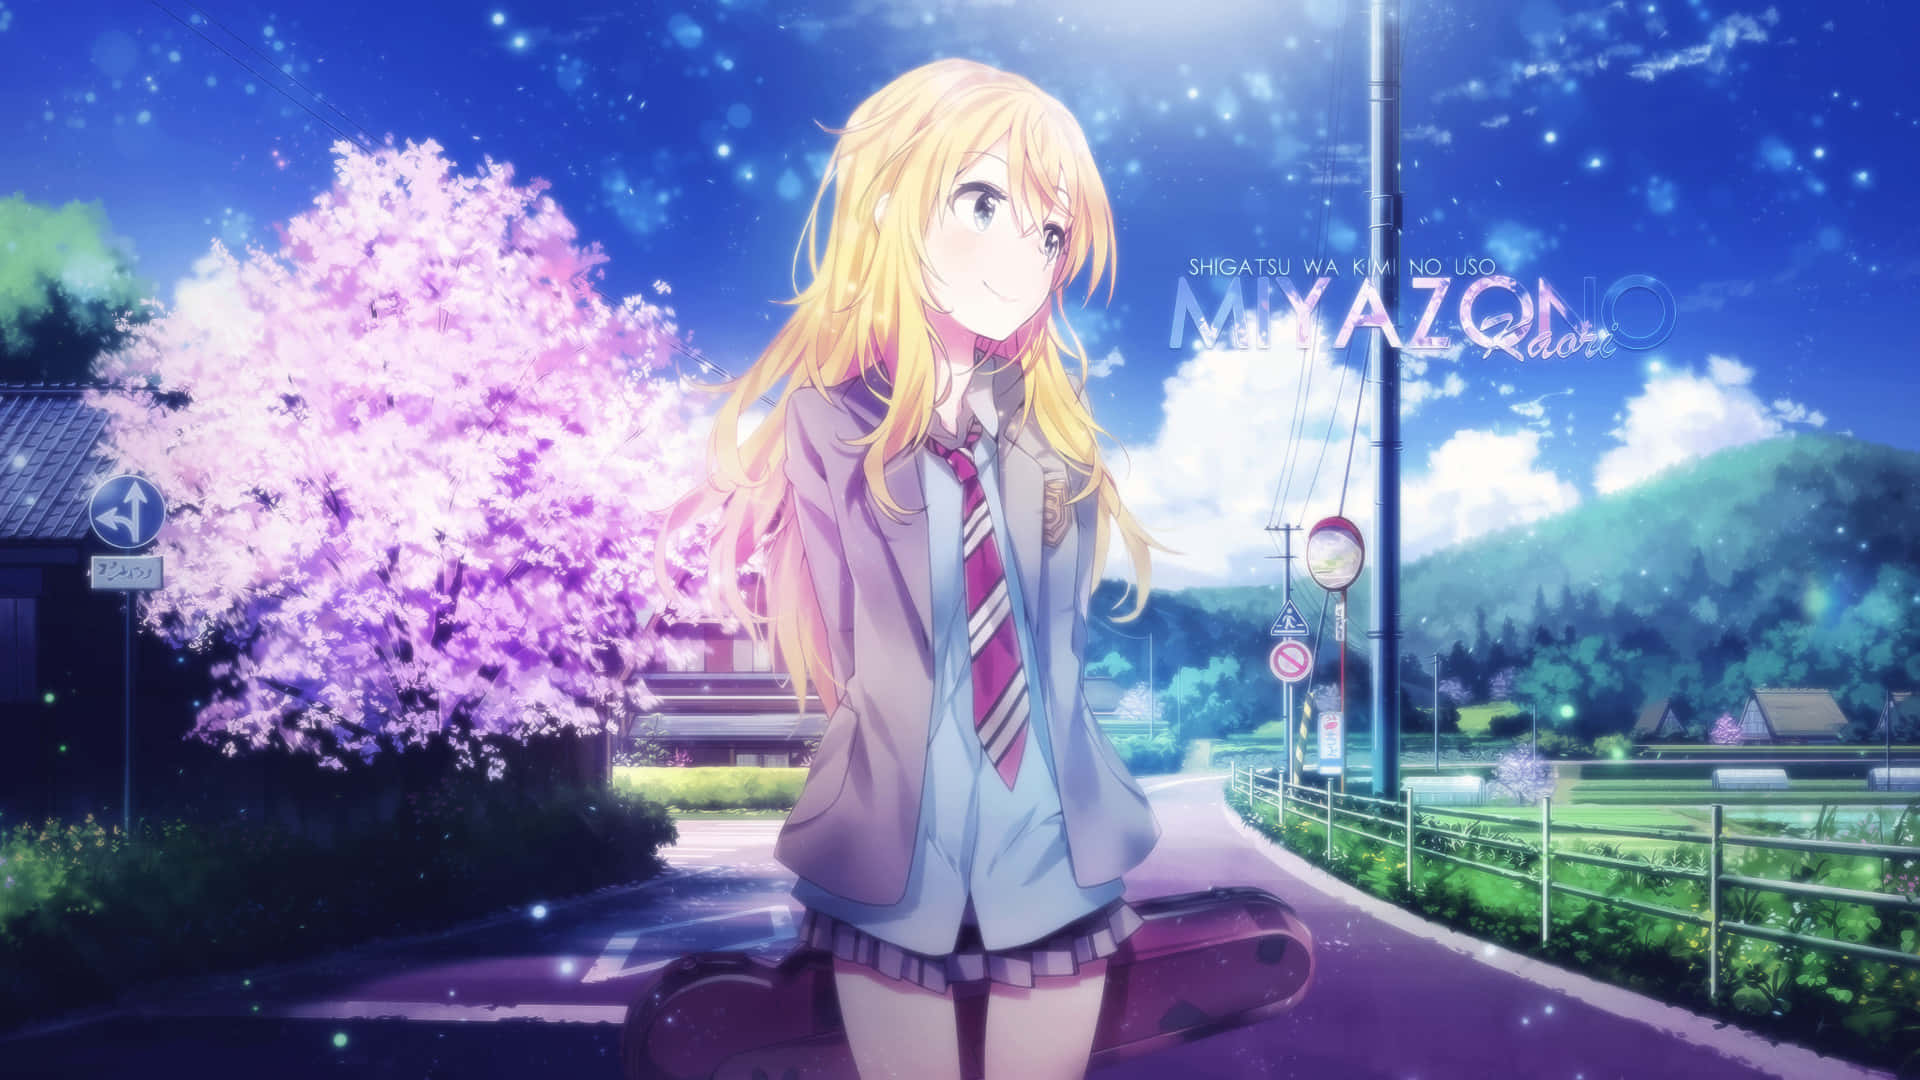 Your Lie In April Background Wallpaper